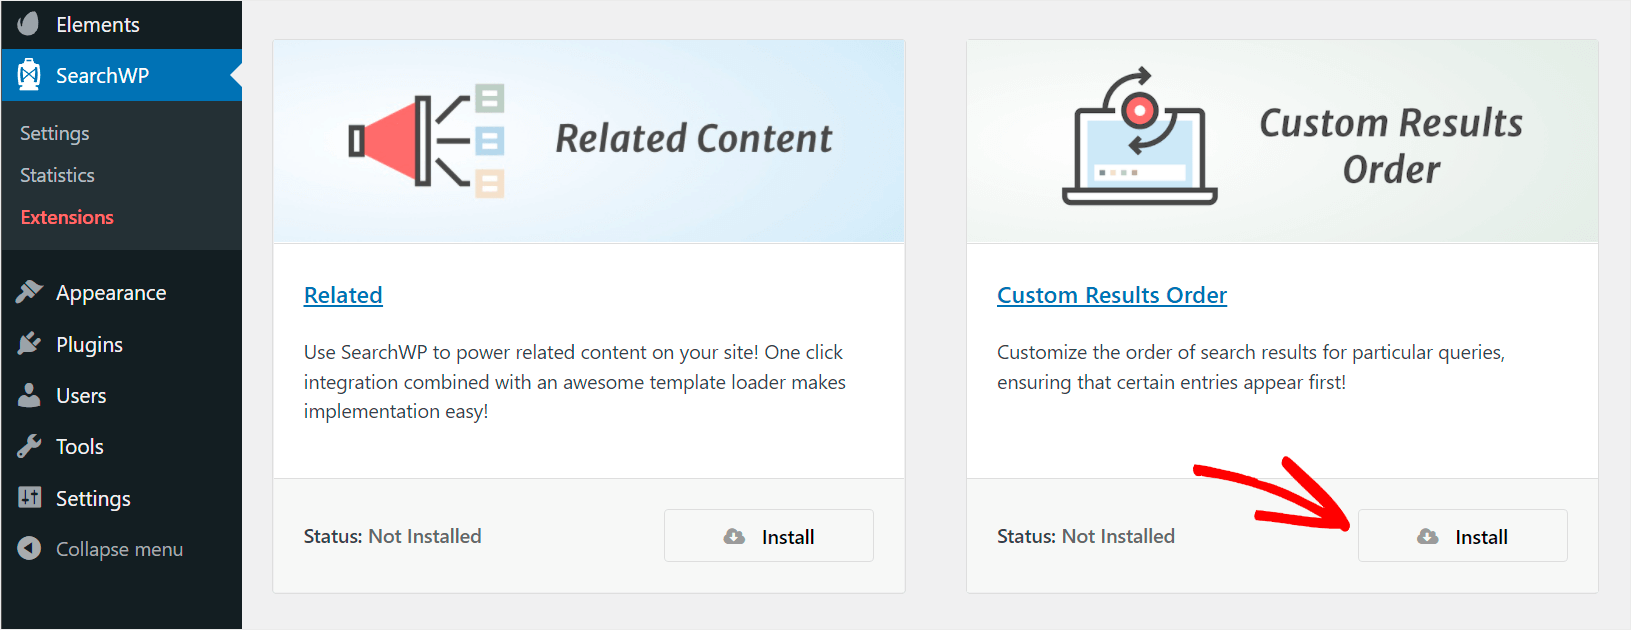 install the Custom Results Order extension